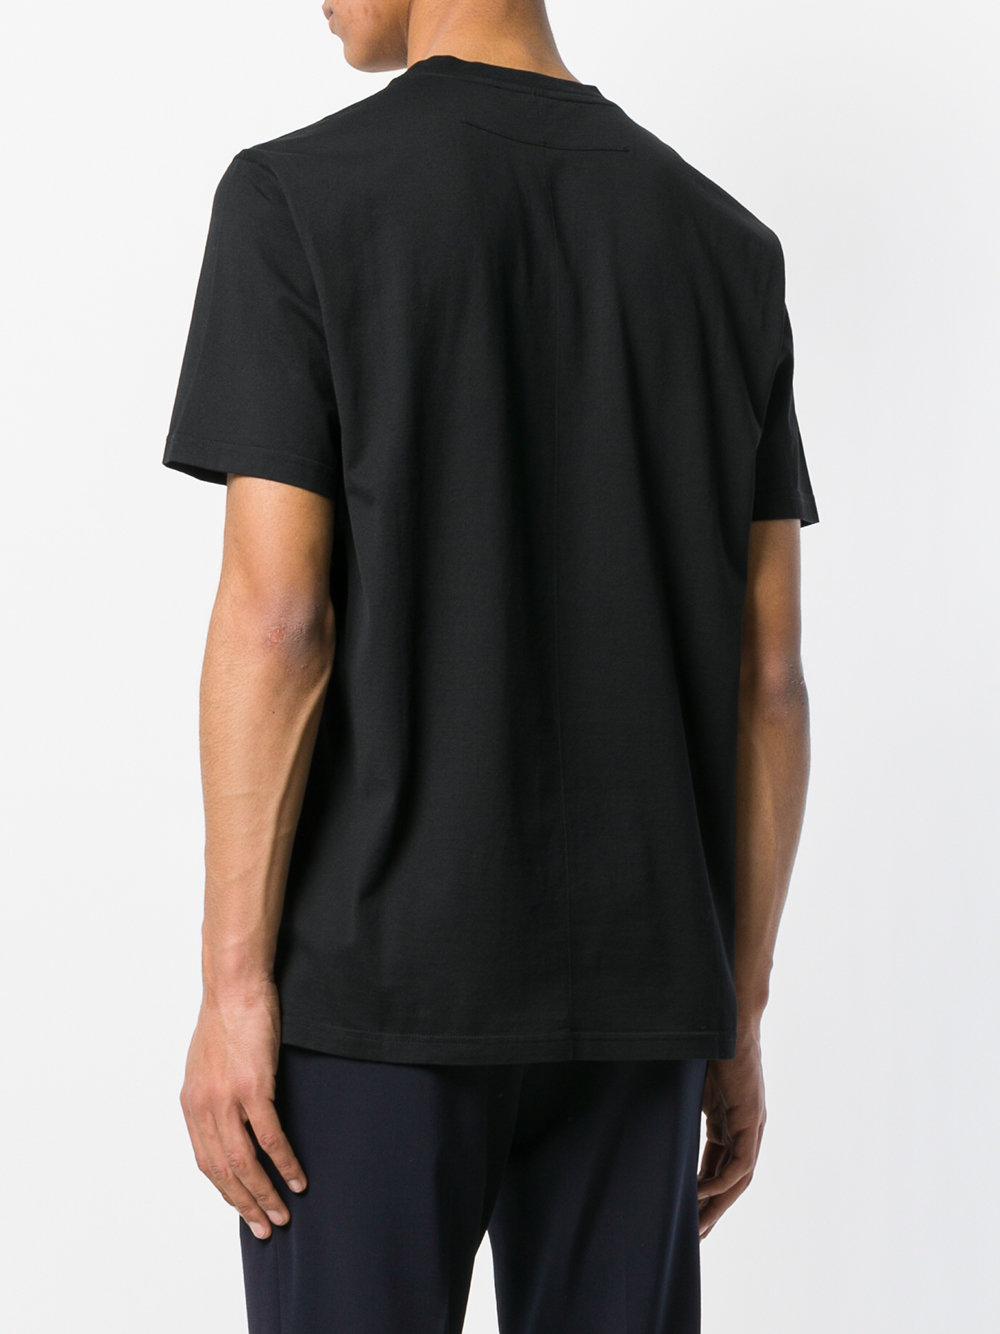 Lyst - Givenchy Cuban Fit Angel T-shirt in Black for Men